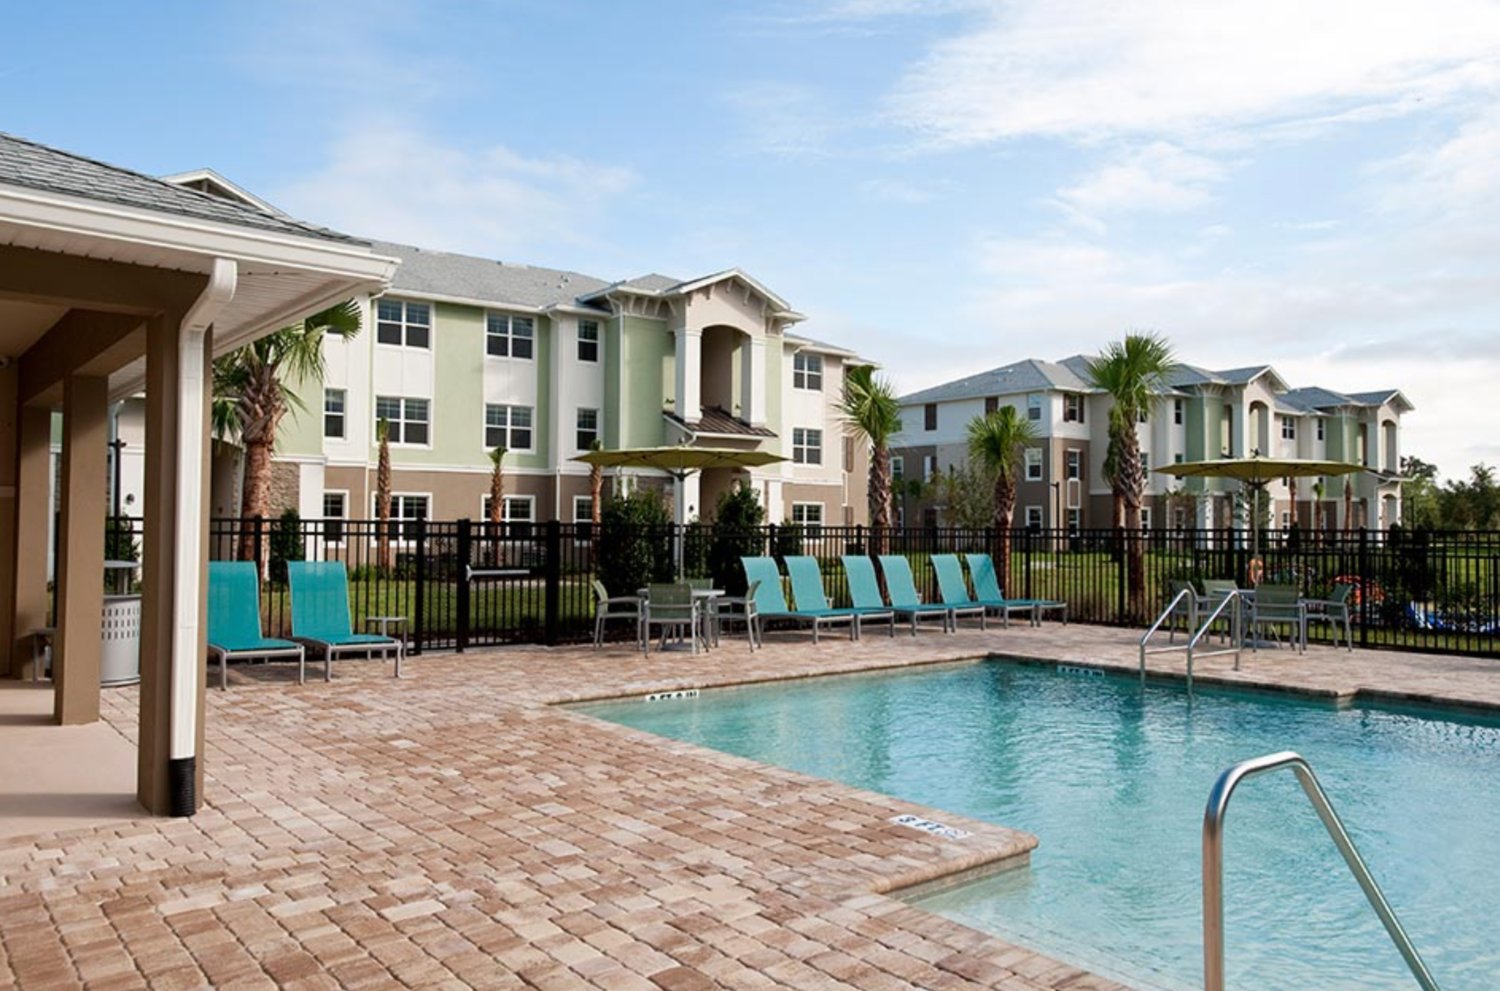 Wellington Park Apartments in Apopka were developed by Wendover Housing Partners; the would-be developers of Southwick Commons.